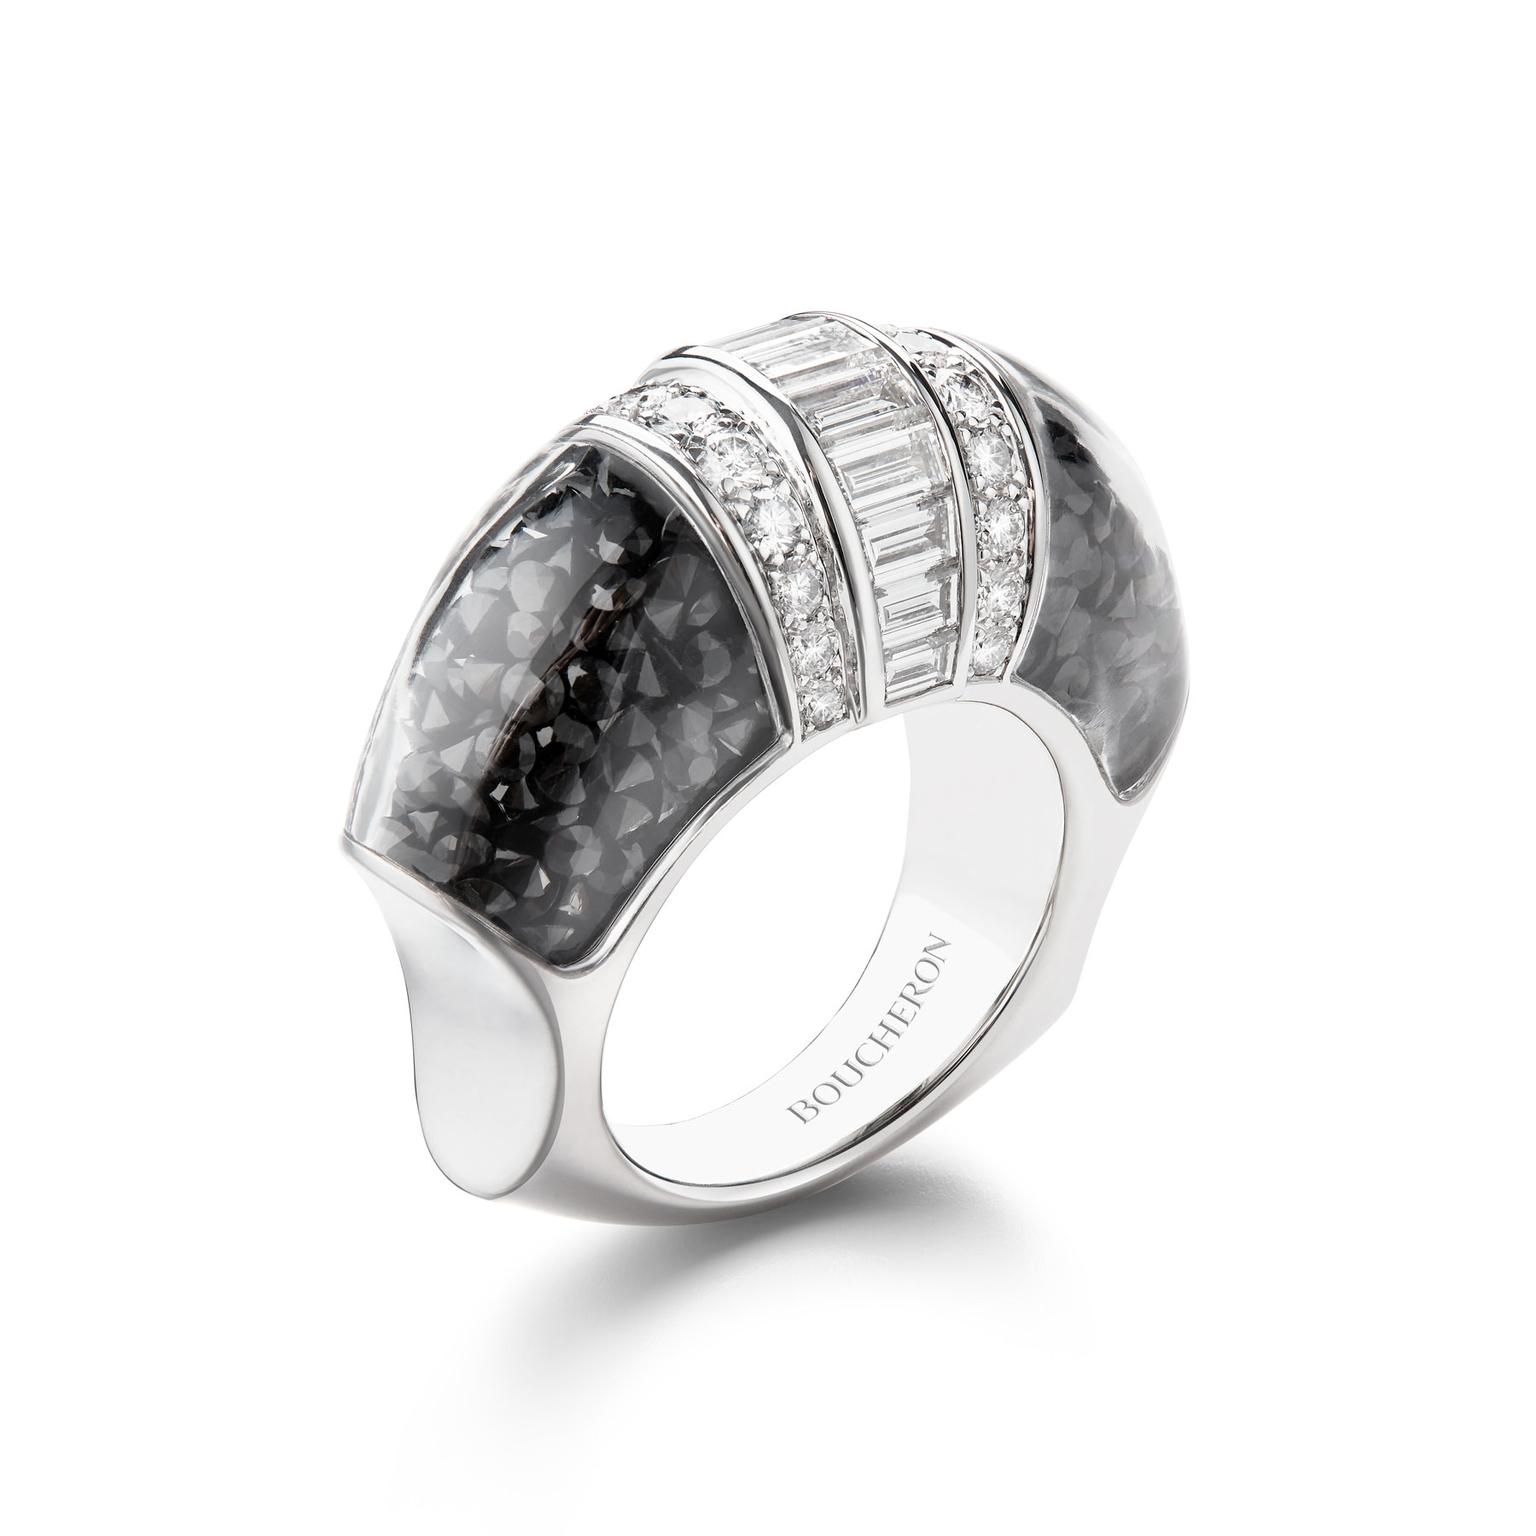 Boucheron Hiver Imperial Grand Nord ring with black spinels